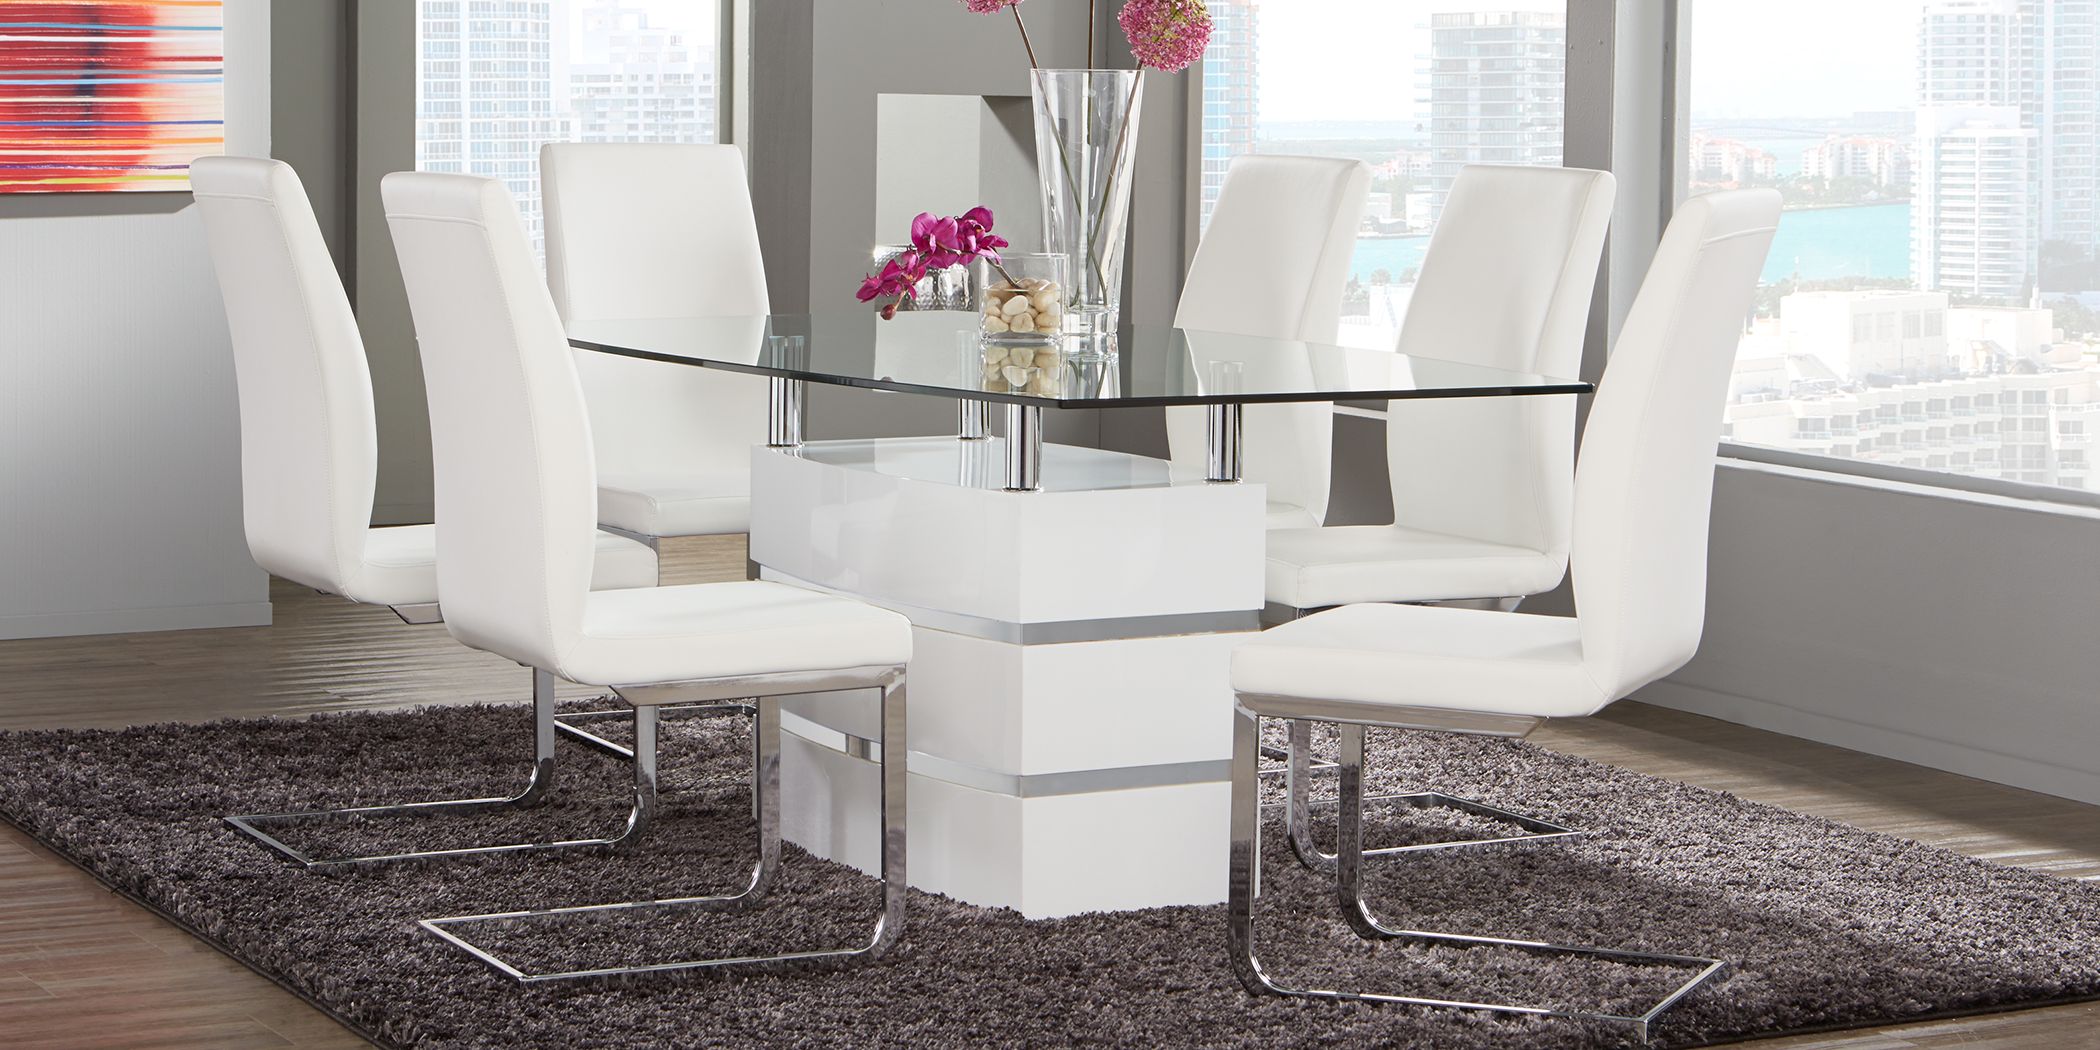 Tria White 5 Pc Rectangle Dining Room, Rooms To Go Dining Table